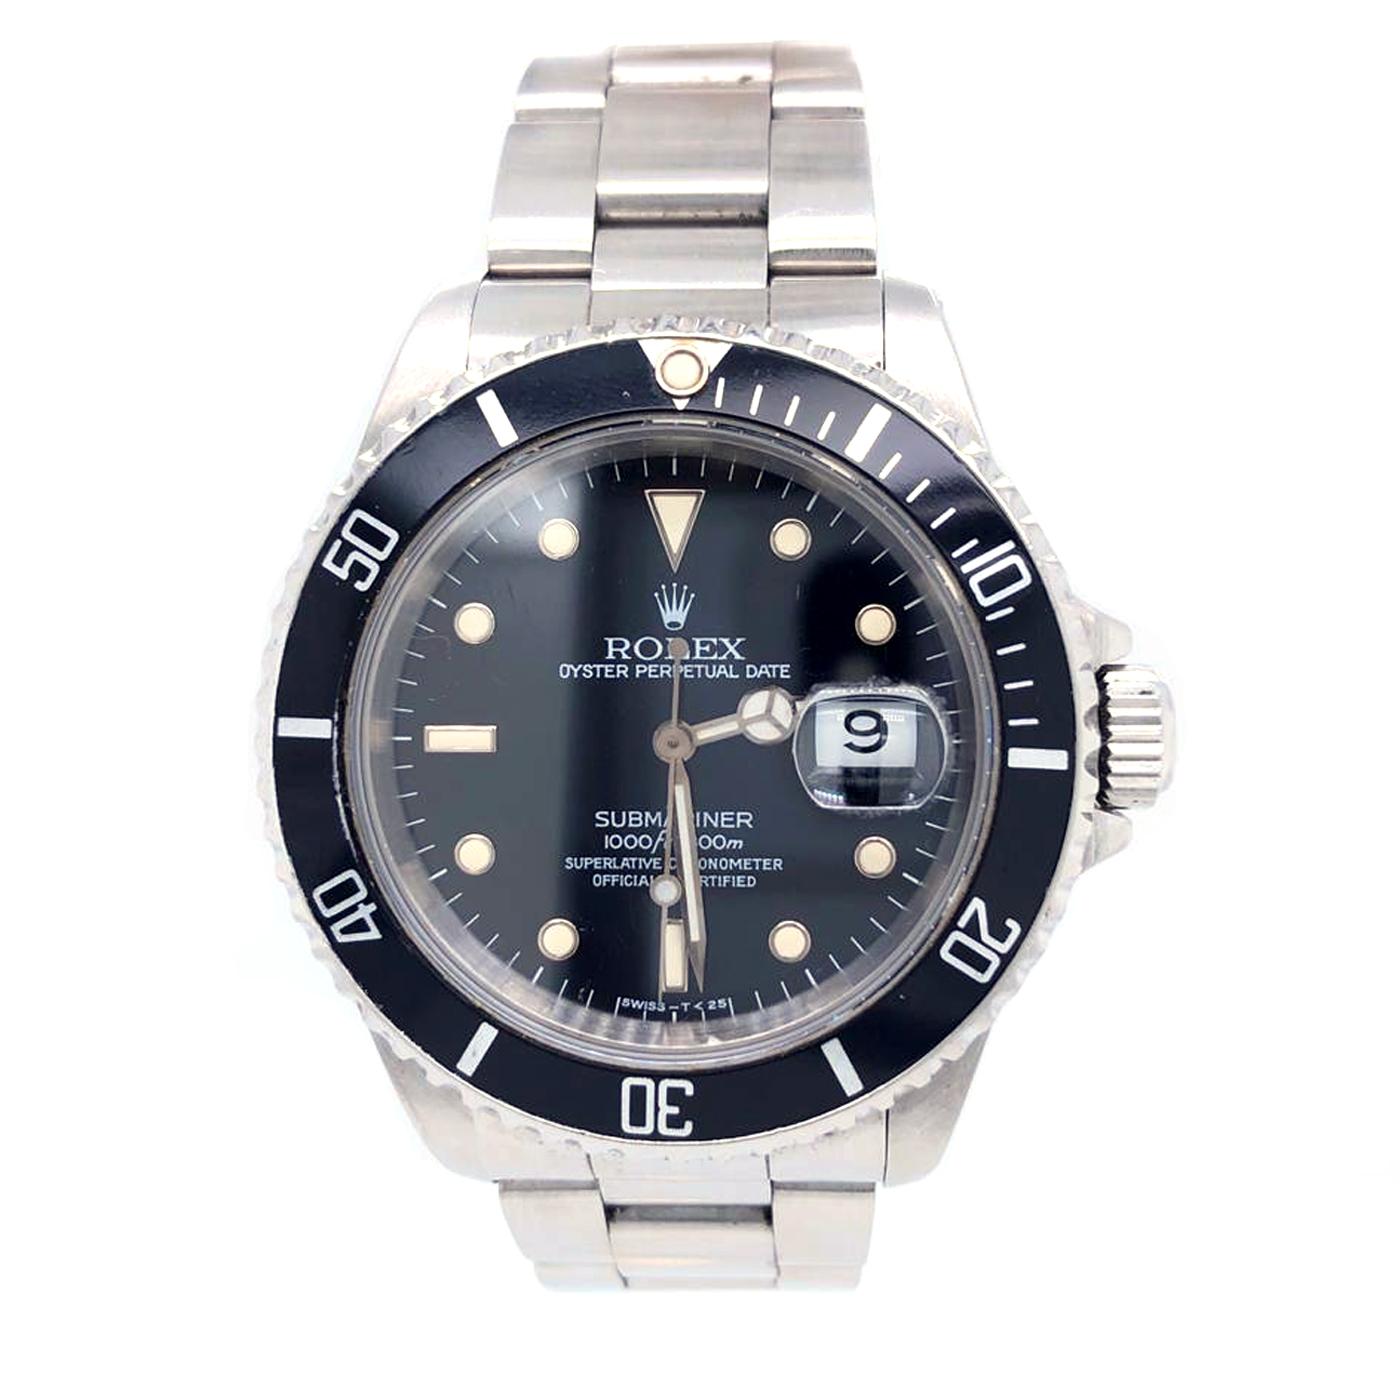 Brand: Rolex
Model: 16610
Model: Submariner Date
Movement: Automatic
Bracelet: Oyster
Case material: Steel
Bracelet material: Steel
Year of production: 1992 N serial number
Condition: MINT CONDITION (Worn with little to no signs of wear)
Box: